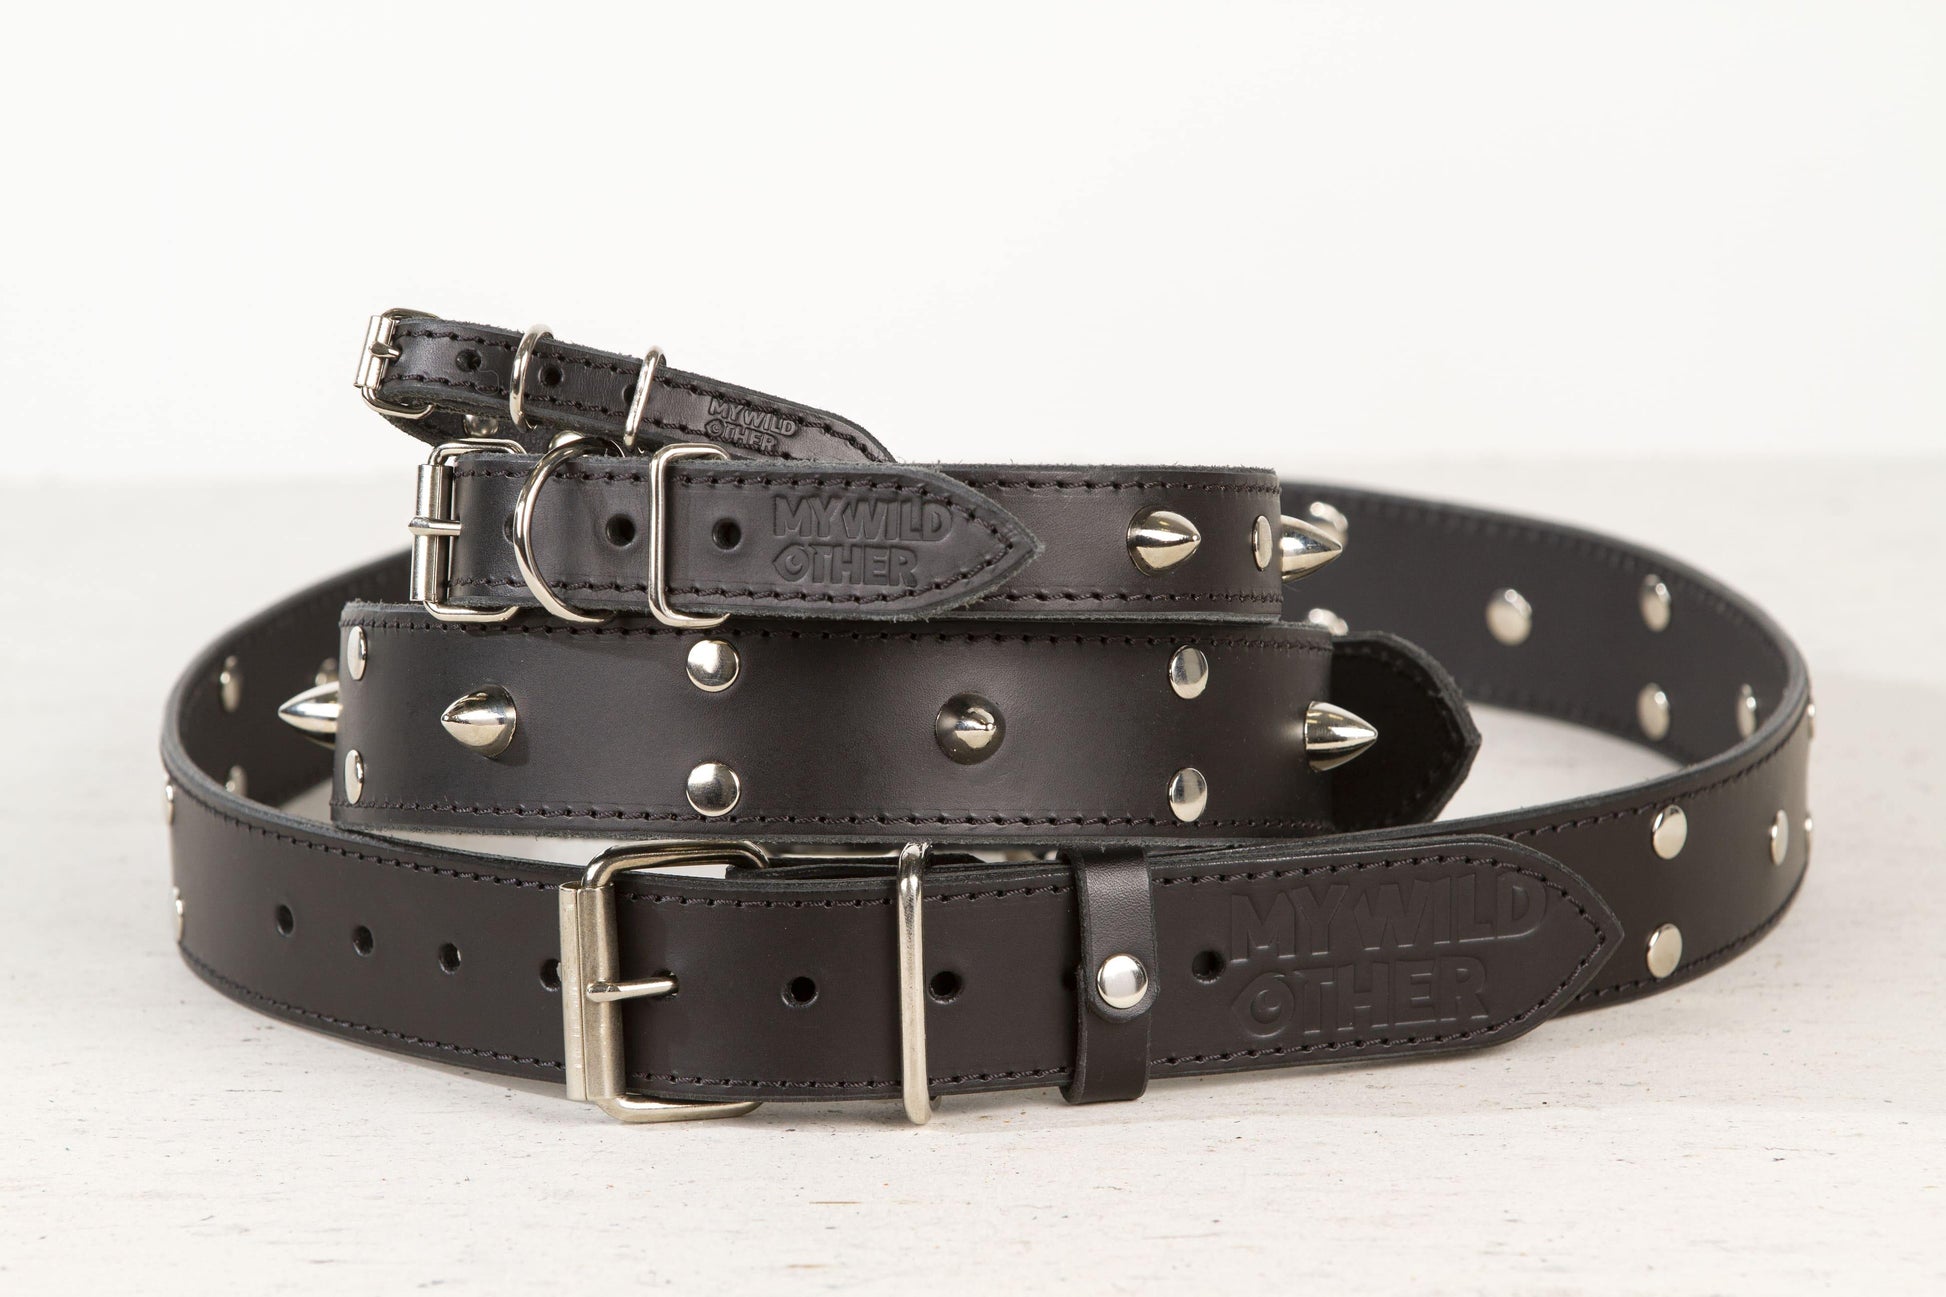 Handmade black leather STUDDED dog collar - premium dog goods handmade in Europe by My Wild Other